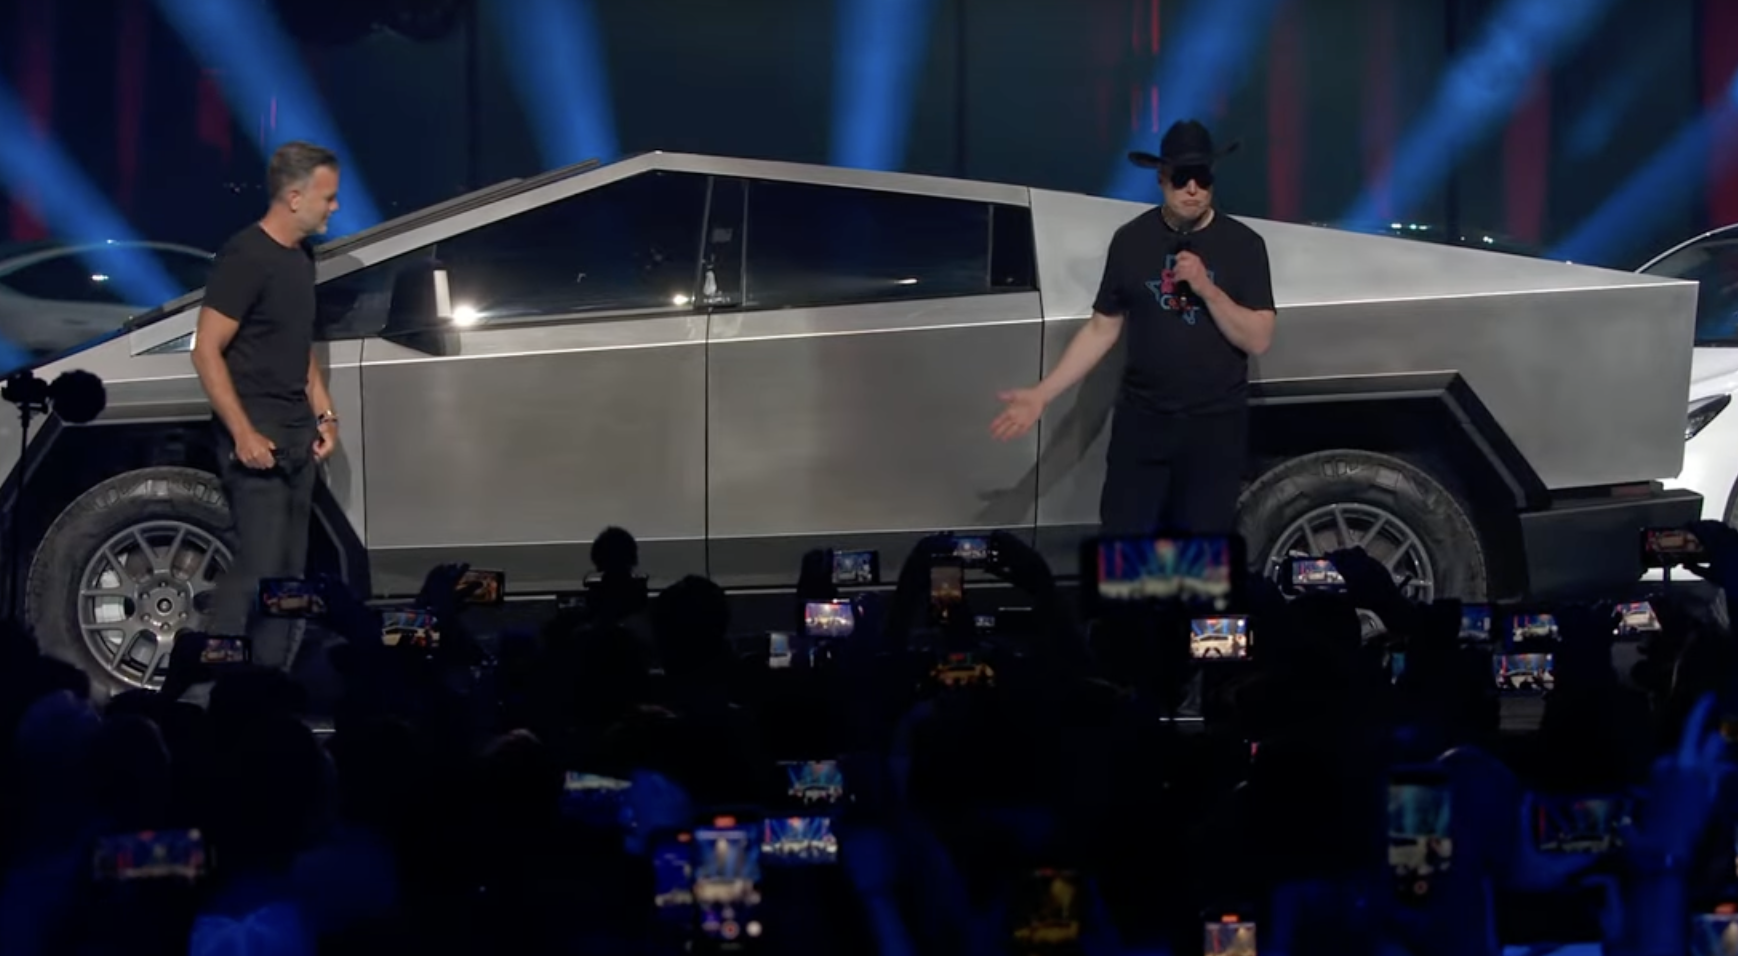 Elon Musk shows off the Tesla Cybertruck at the company's recent Cyber Rodeo event.